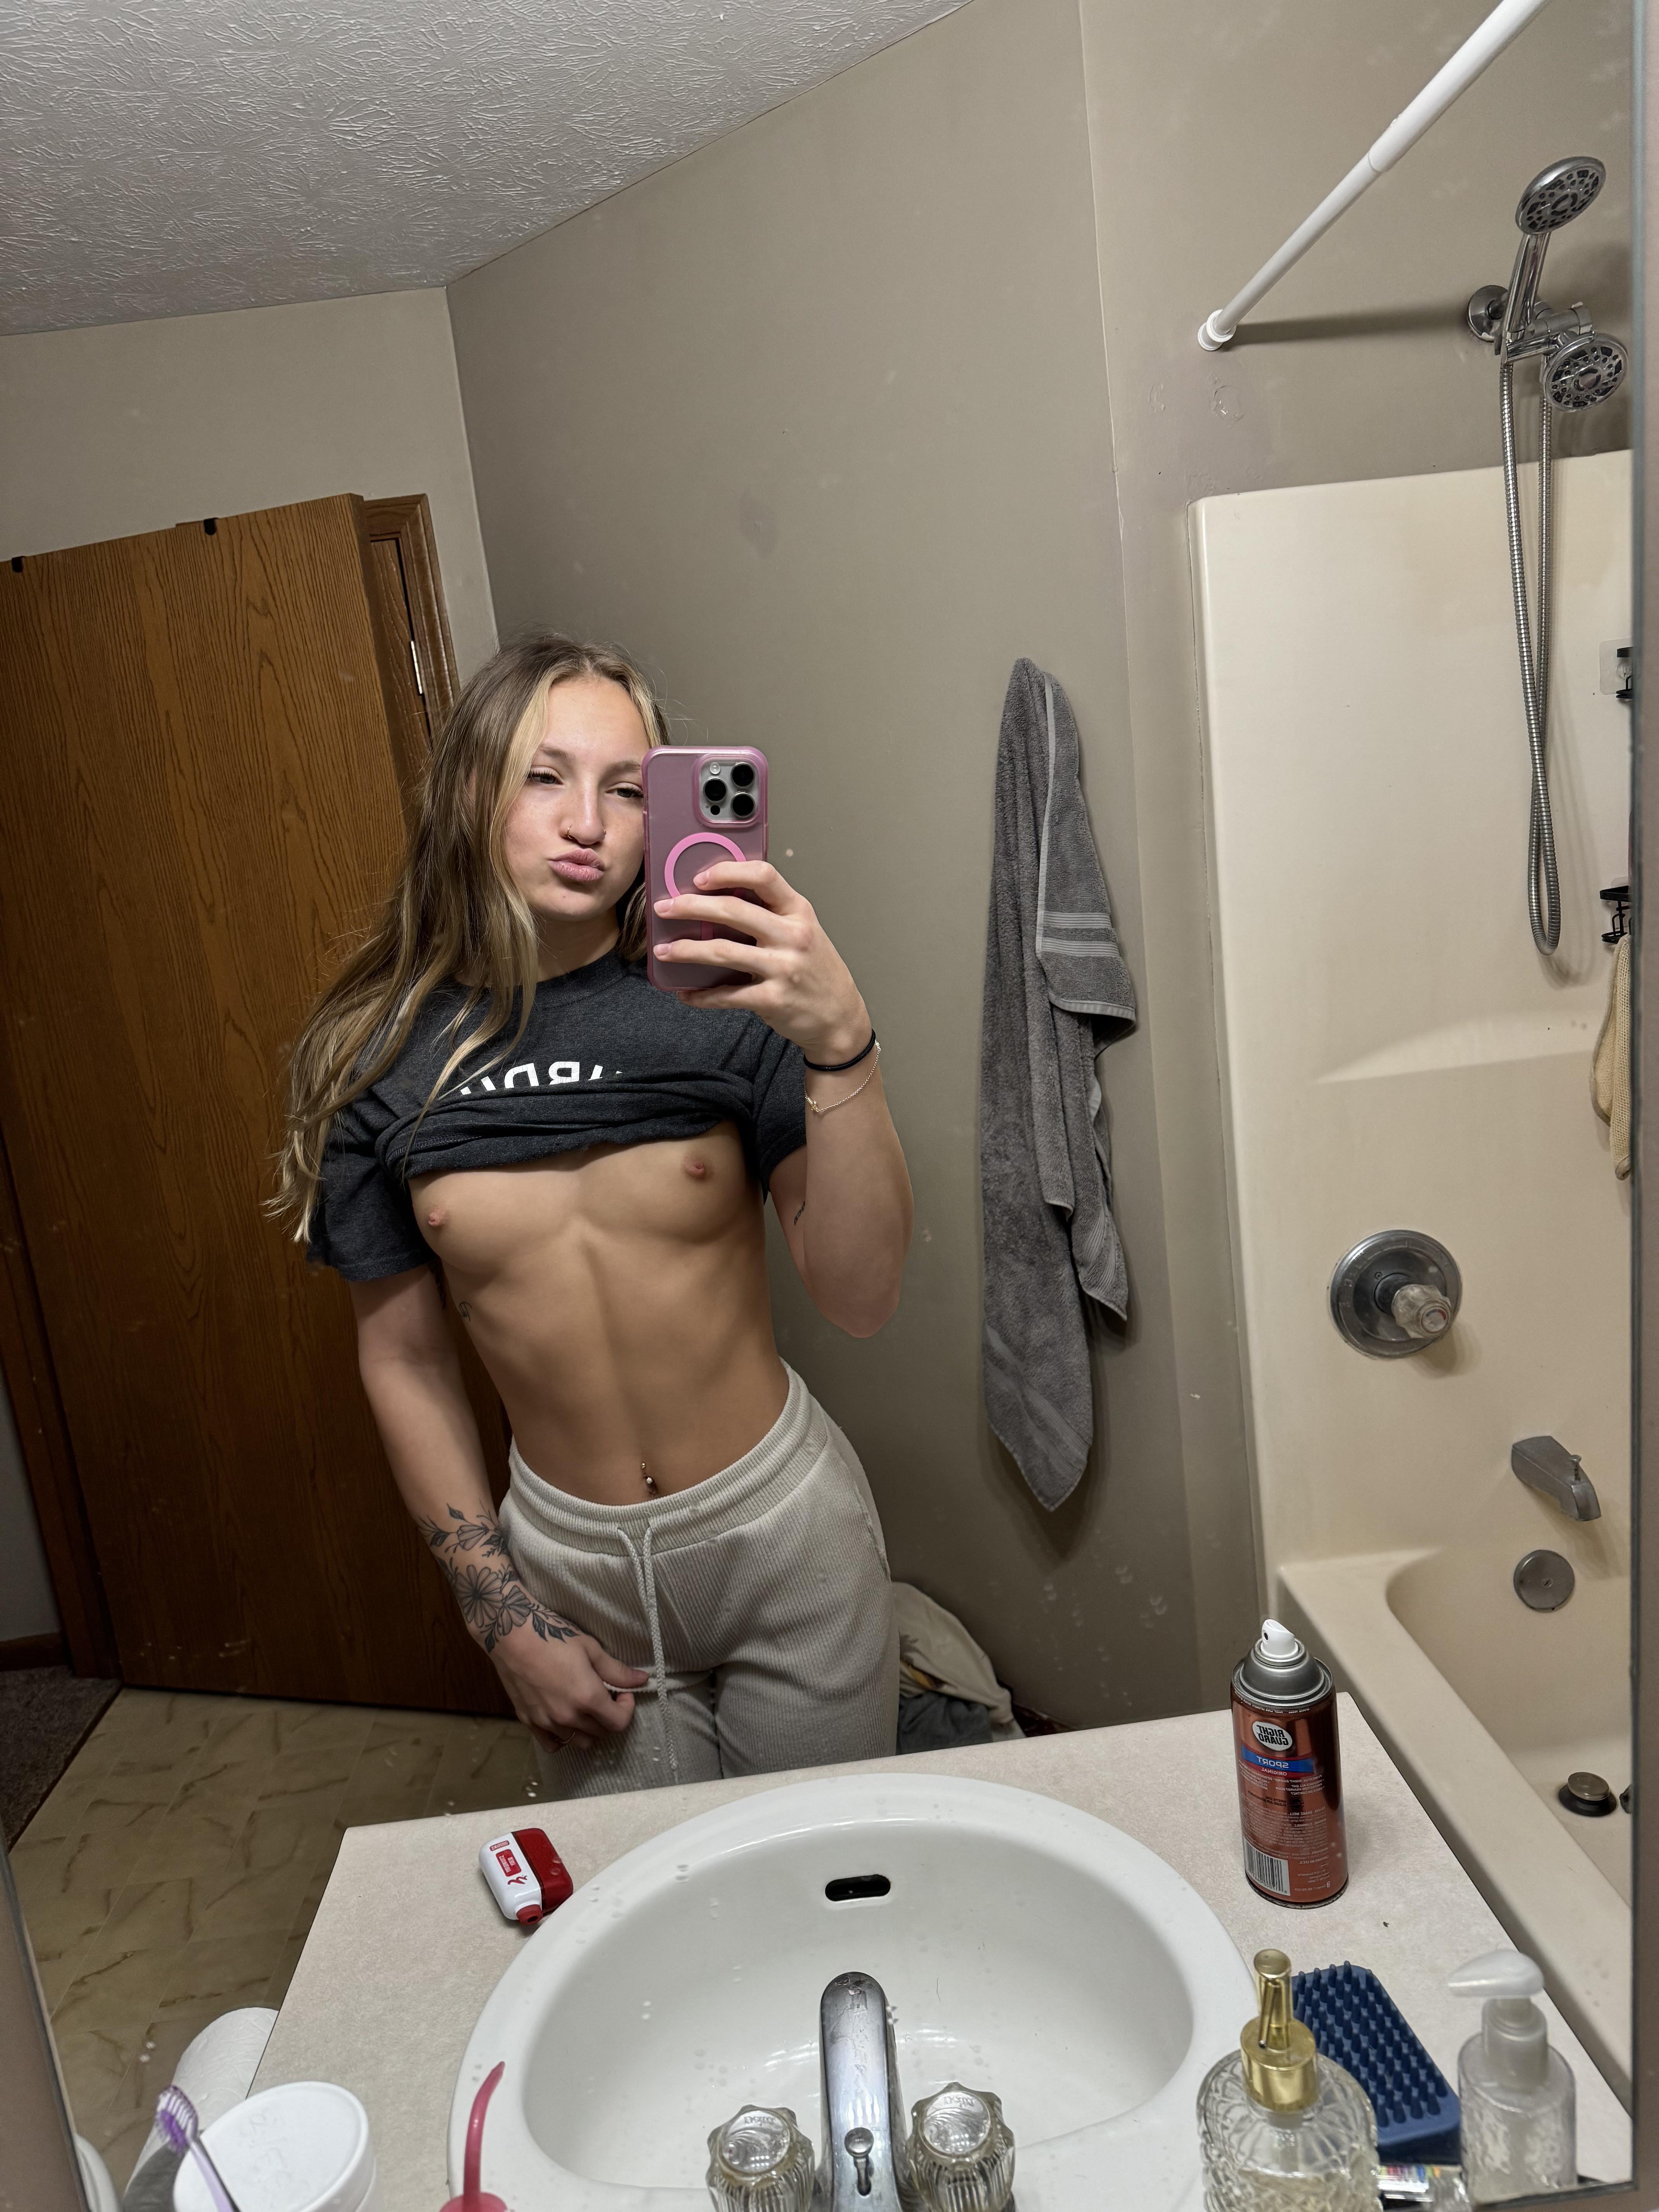 Do you like fit girls